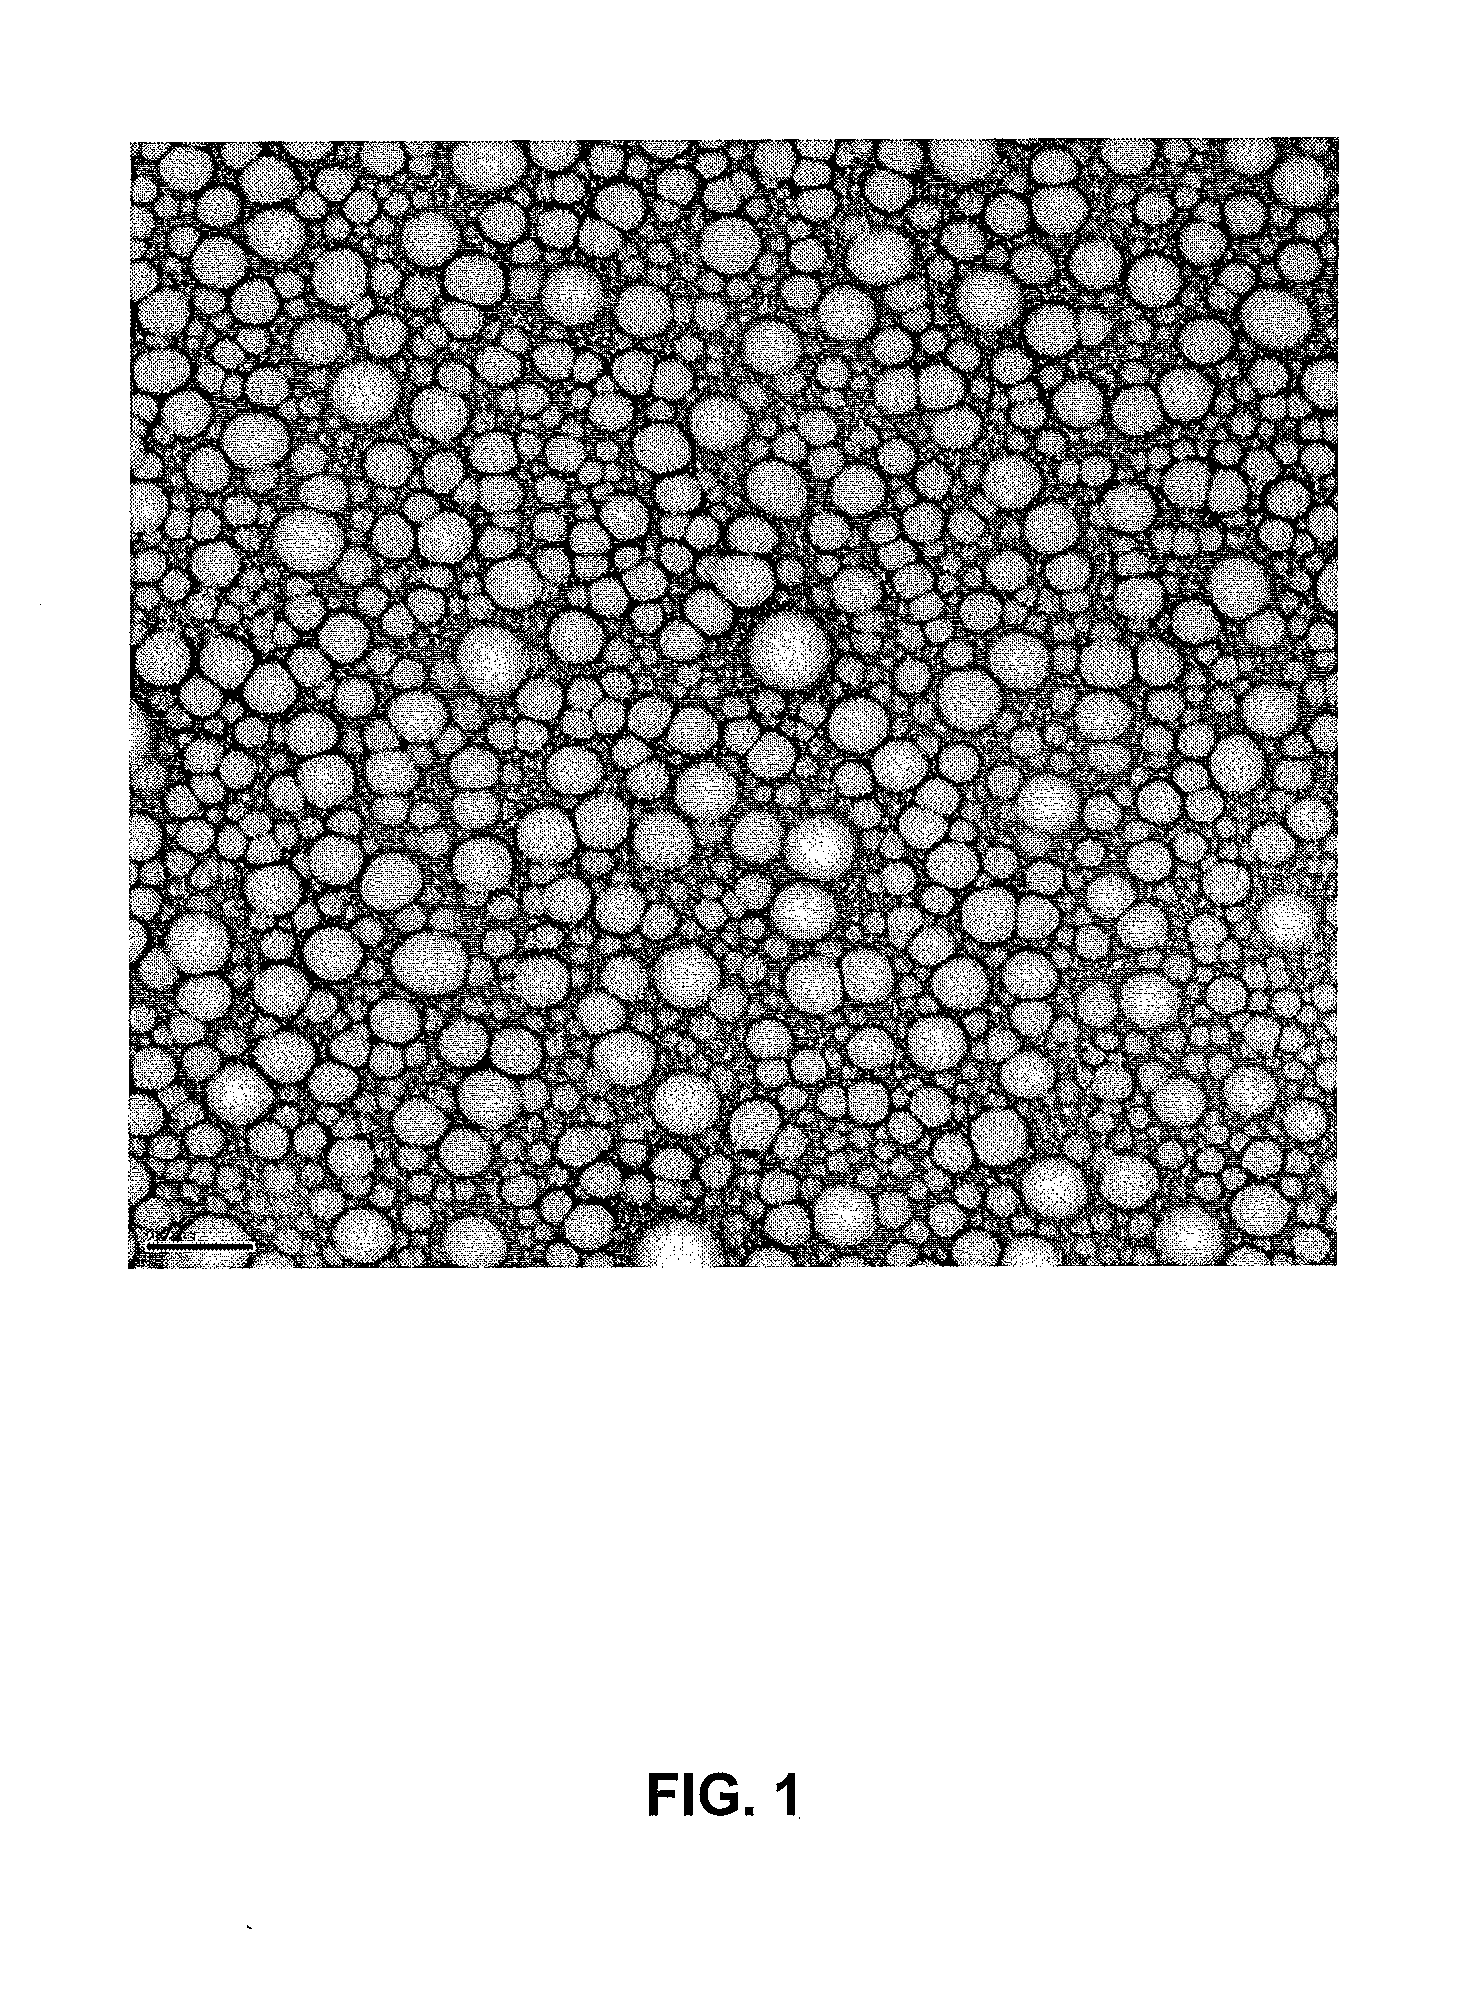 Antimicrobial compositions and methods of use